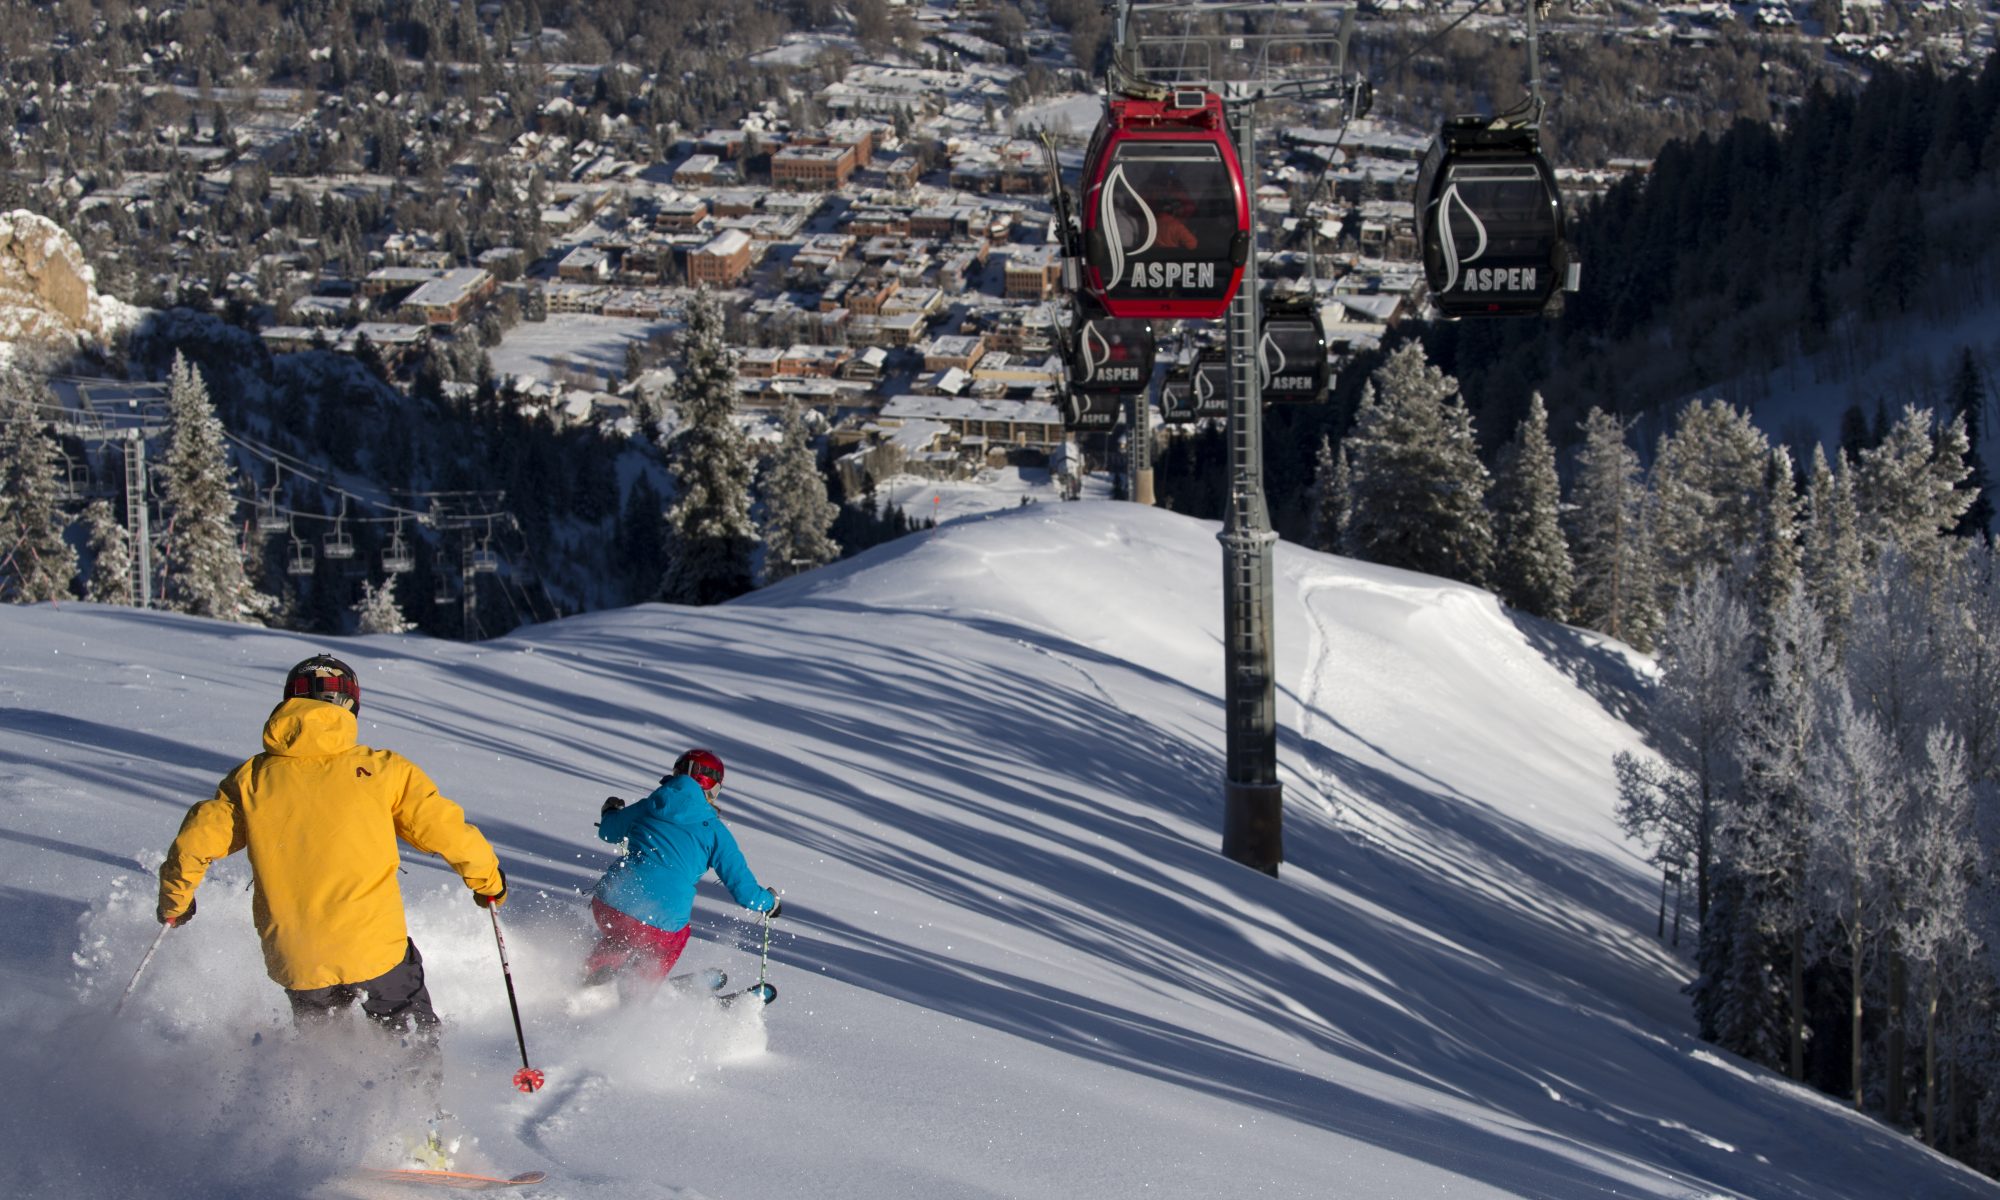 www.Mattpowerphotography.com January 21 2015. Aspen Mountain to Open with Skiing and Riding Memorial Day Weekend.